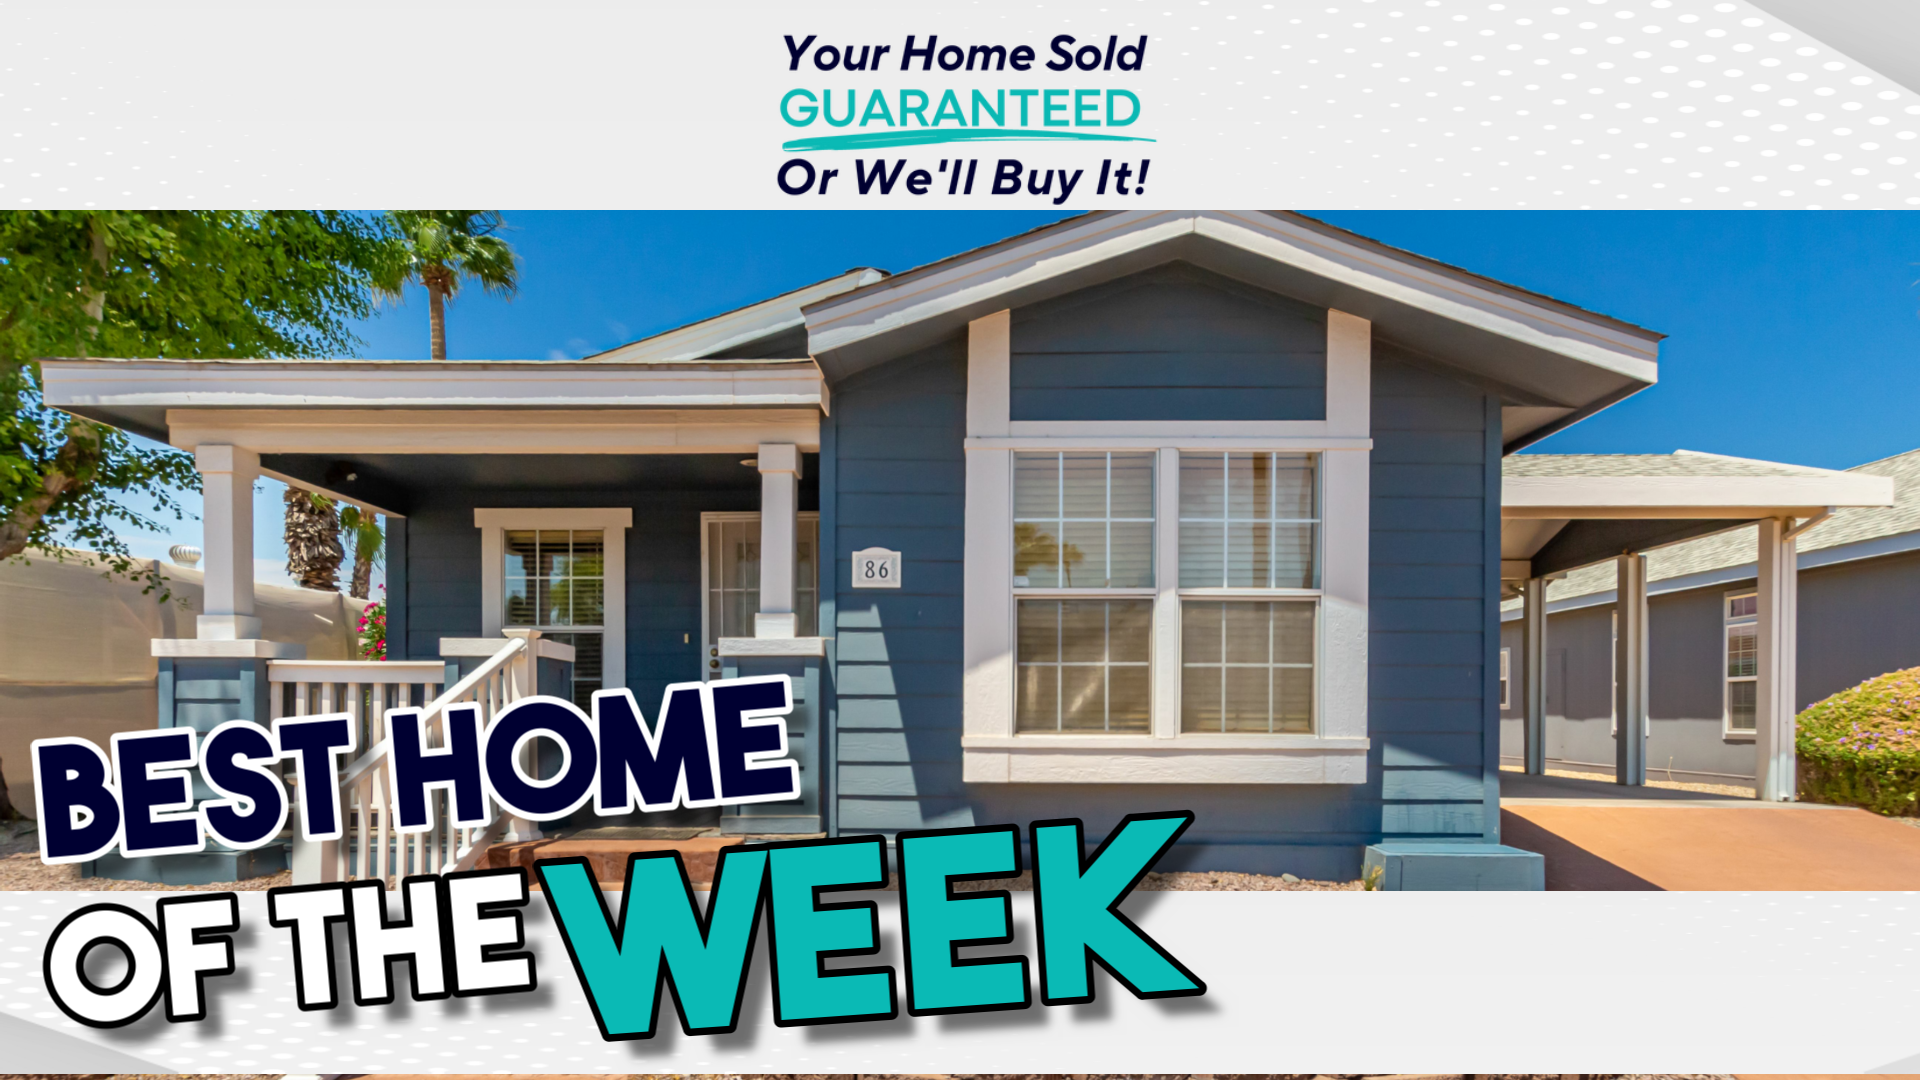 Best Home of the Week- 2401 W SOUTHERN AVE 86, Tempe, AZ 85282